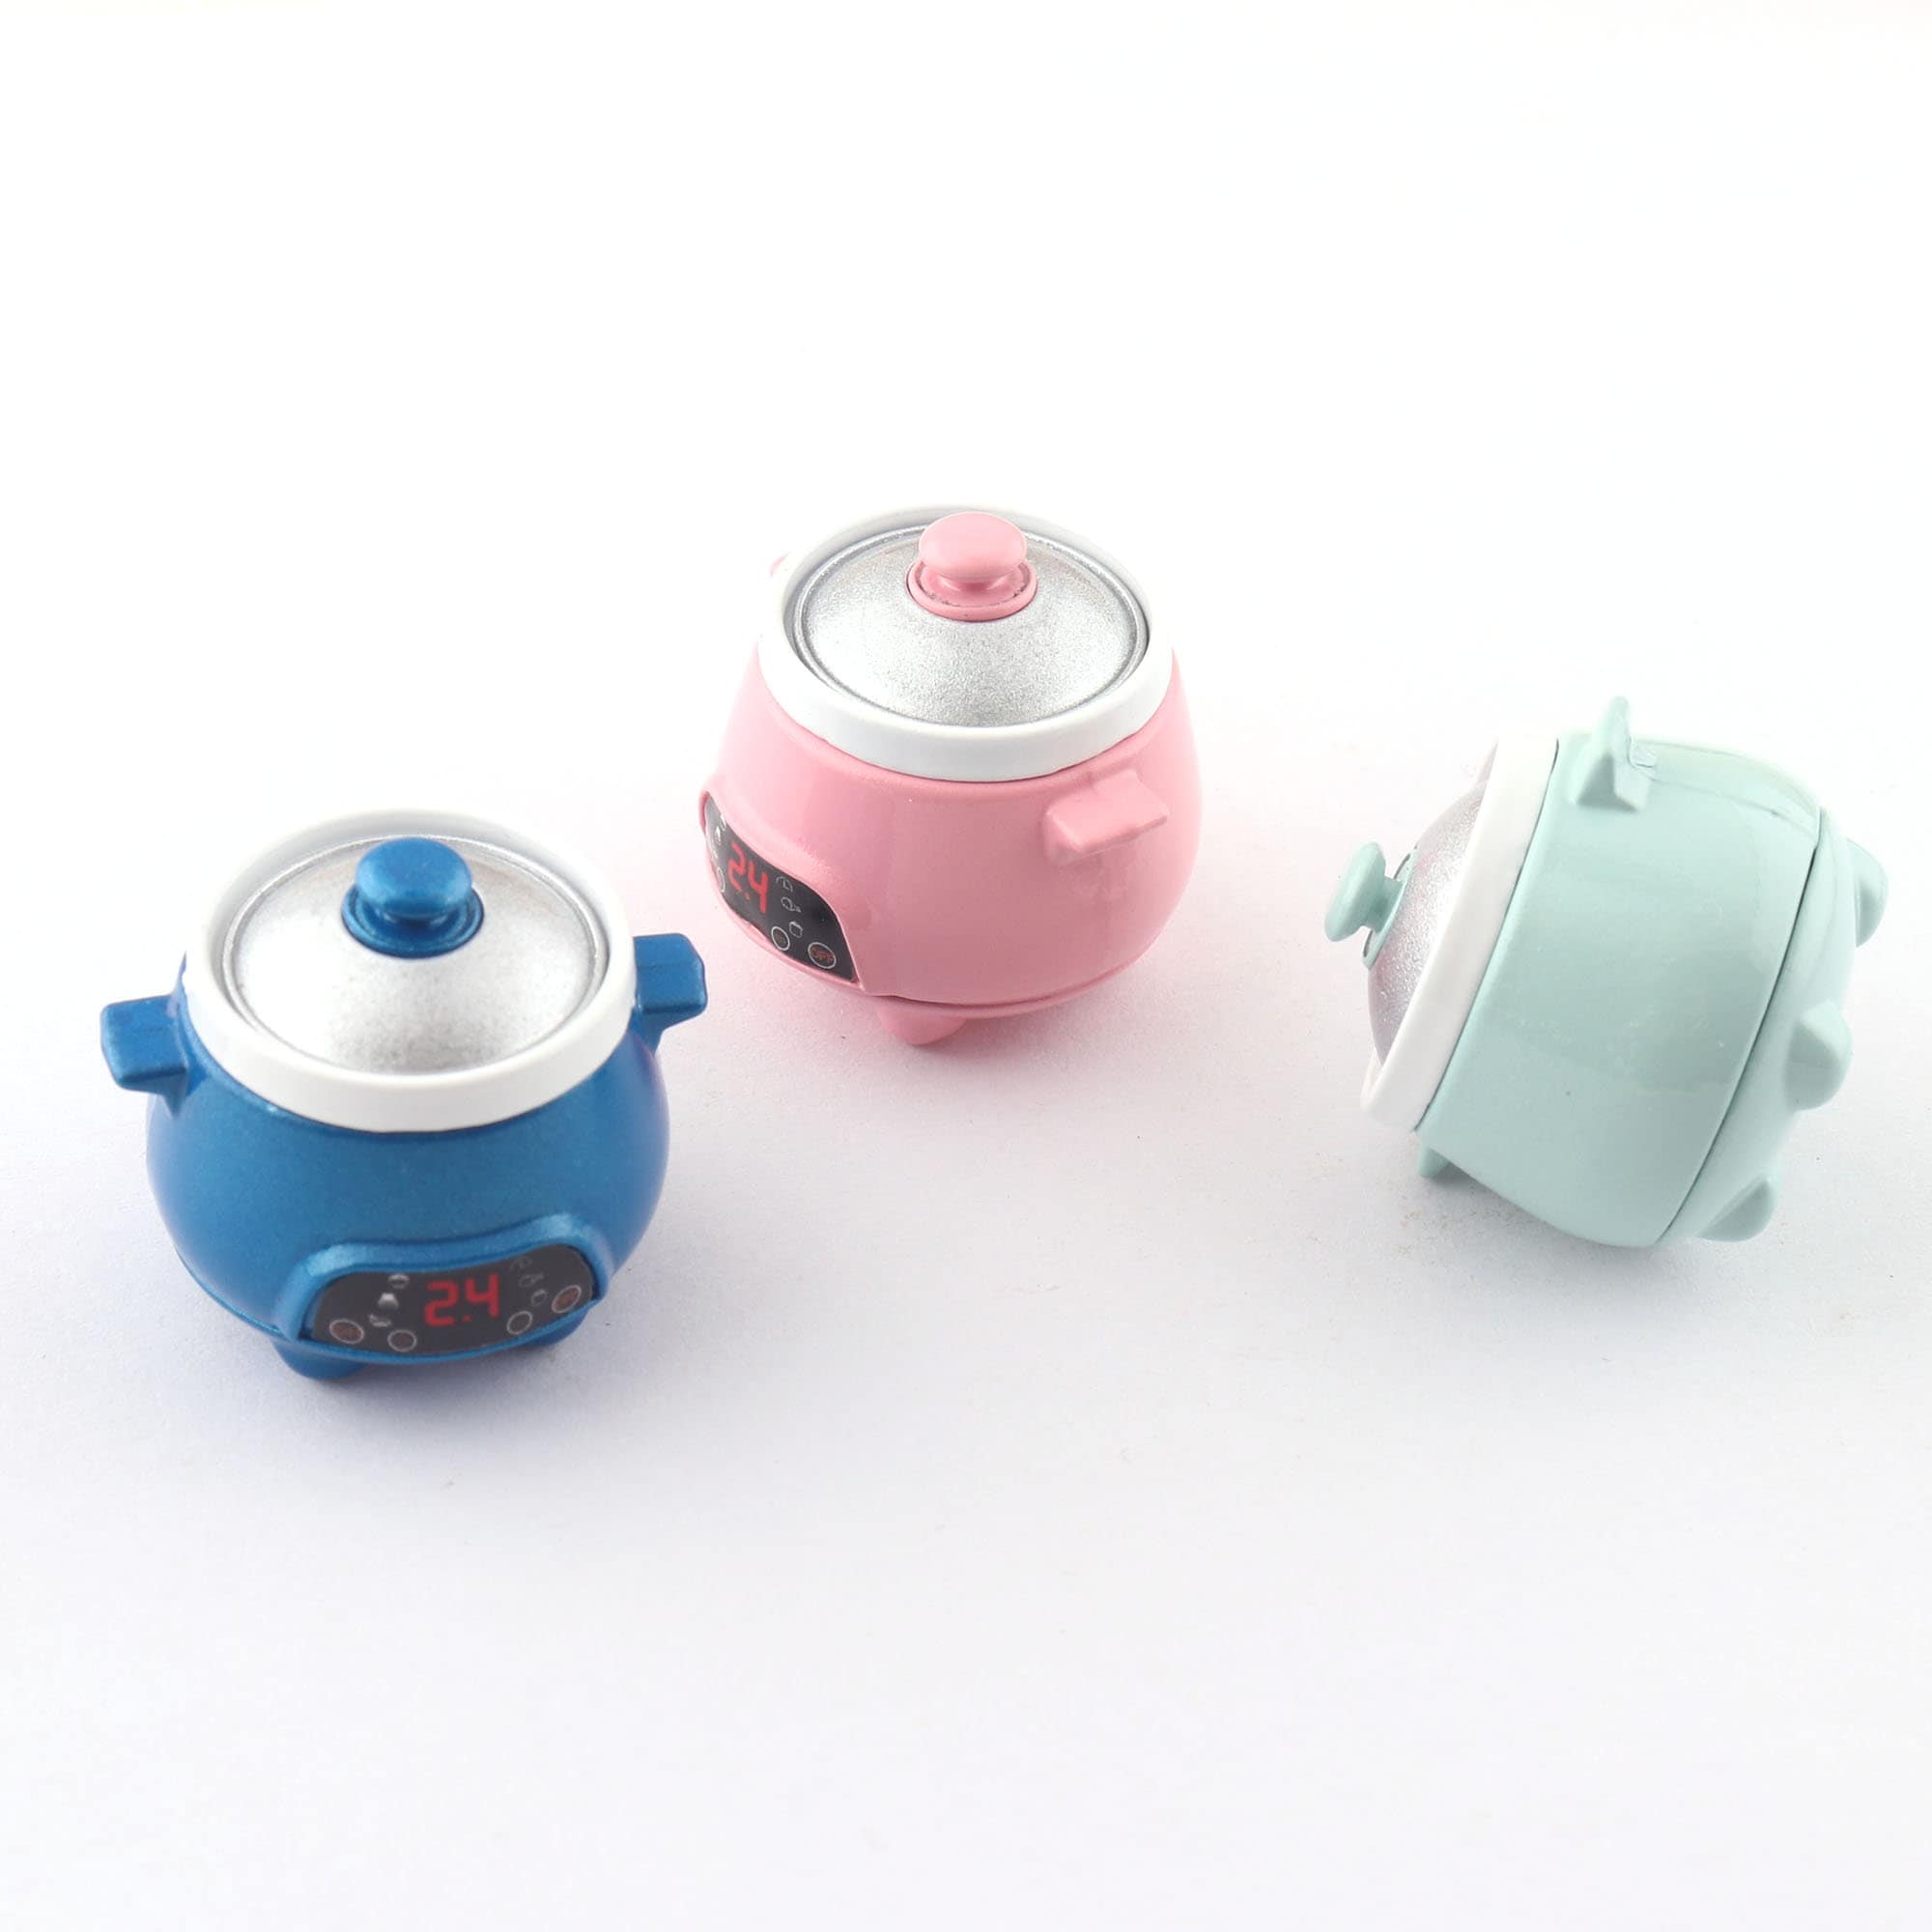 Mini Kitchen Appliance Electric Pressure Cooker Pot Tiny Bakery Tool  Decorating Rice Cooker Doll Furniture Dollhouse Artisan Photography 